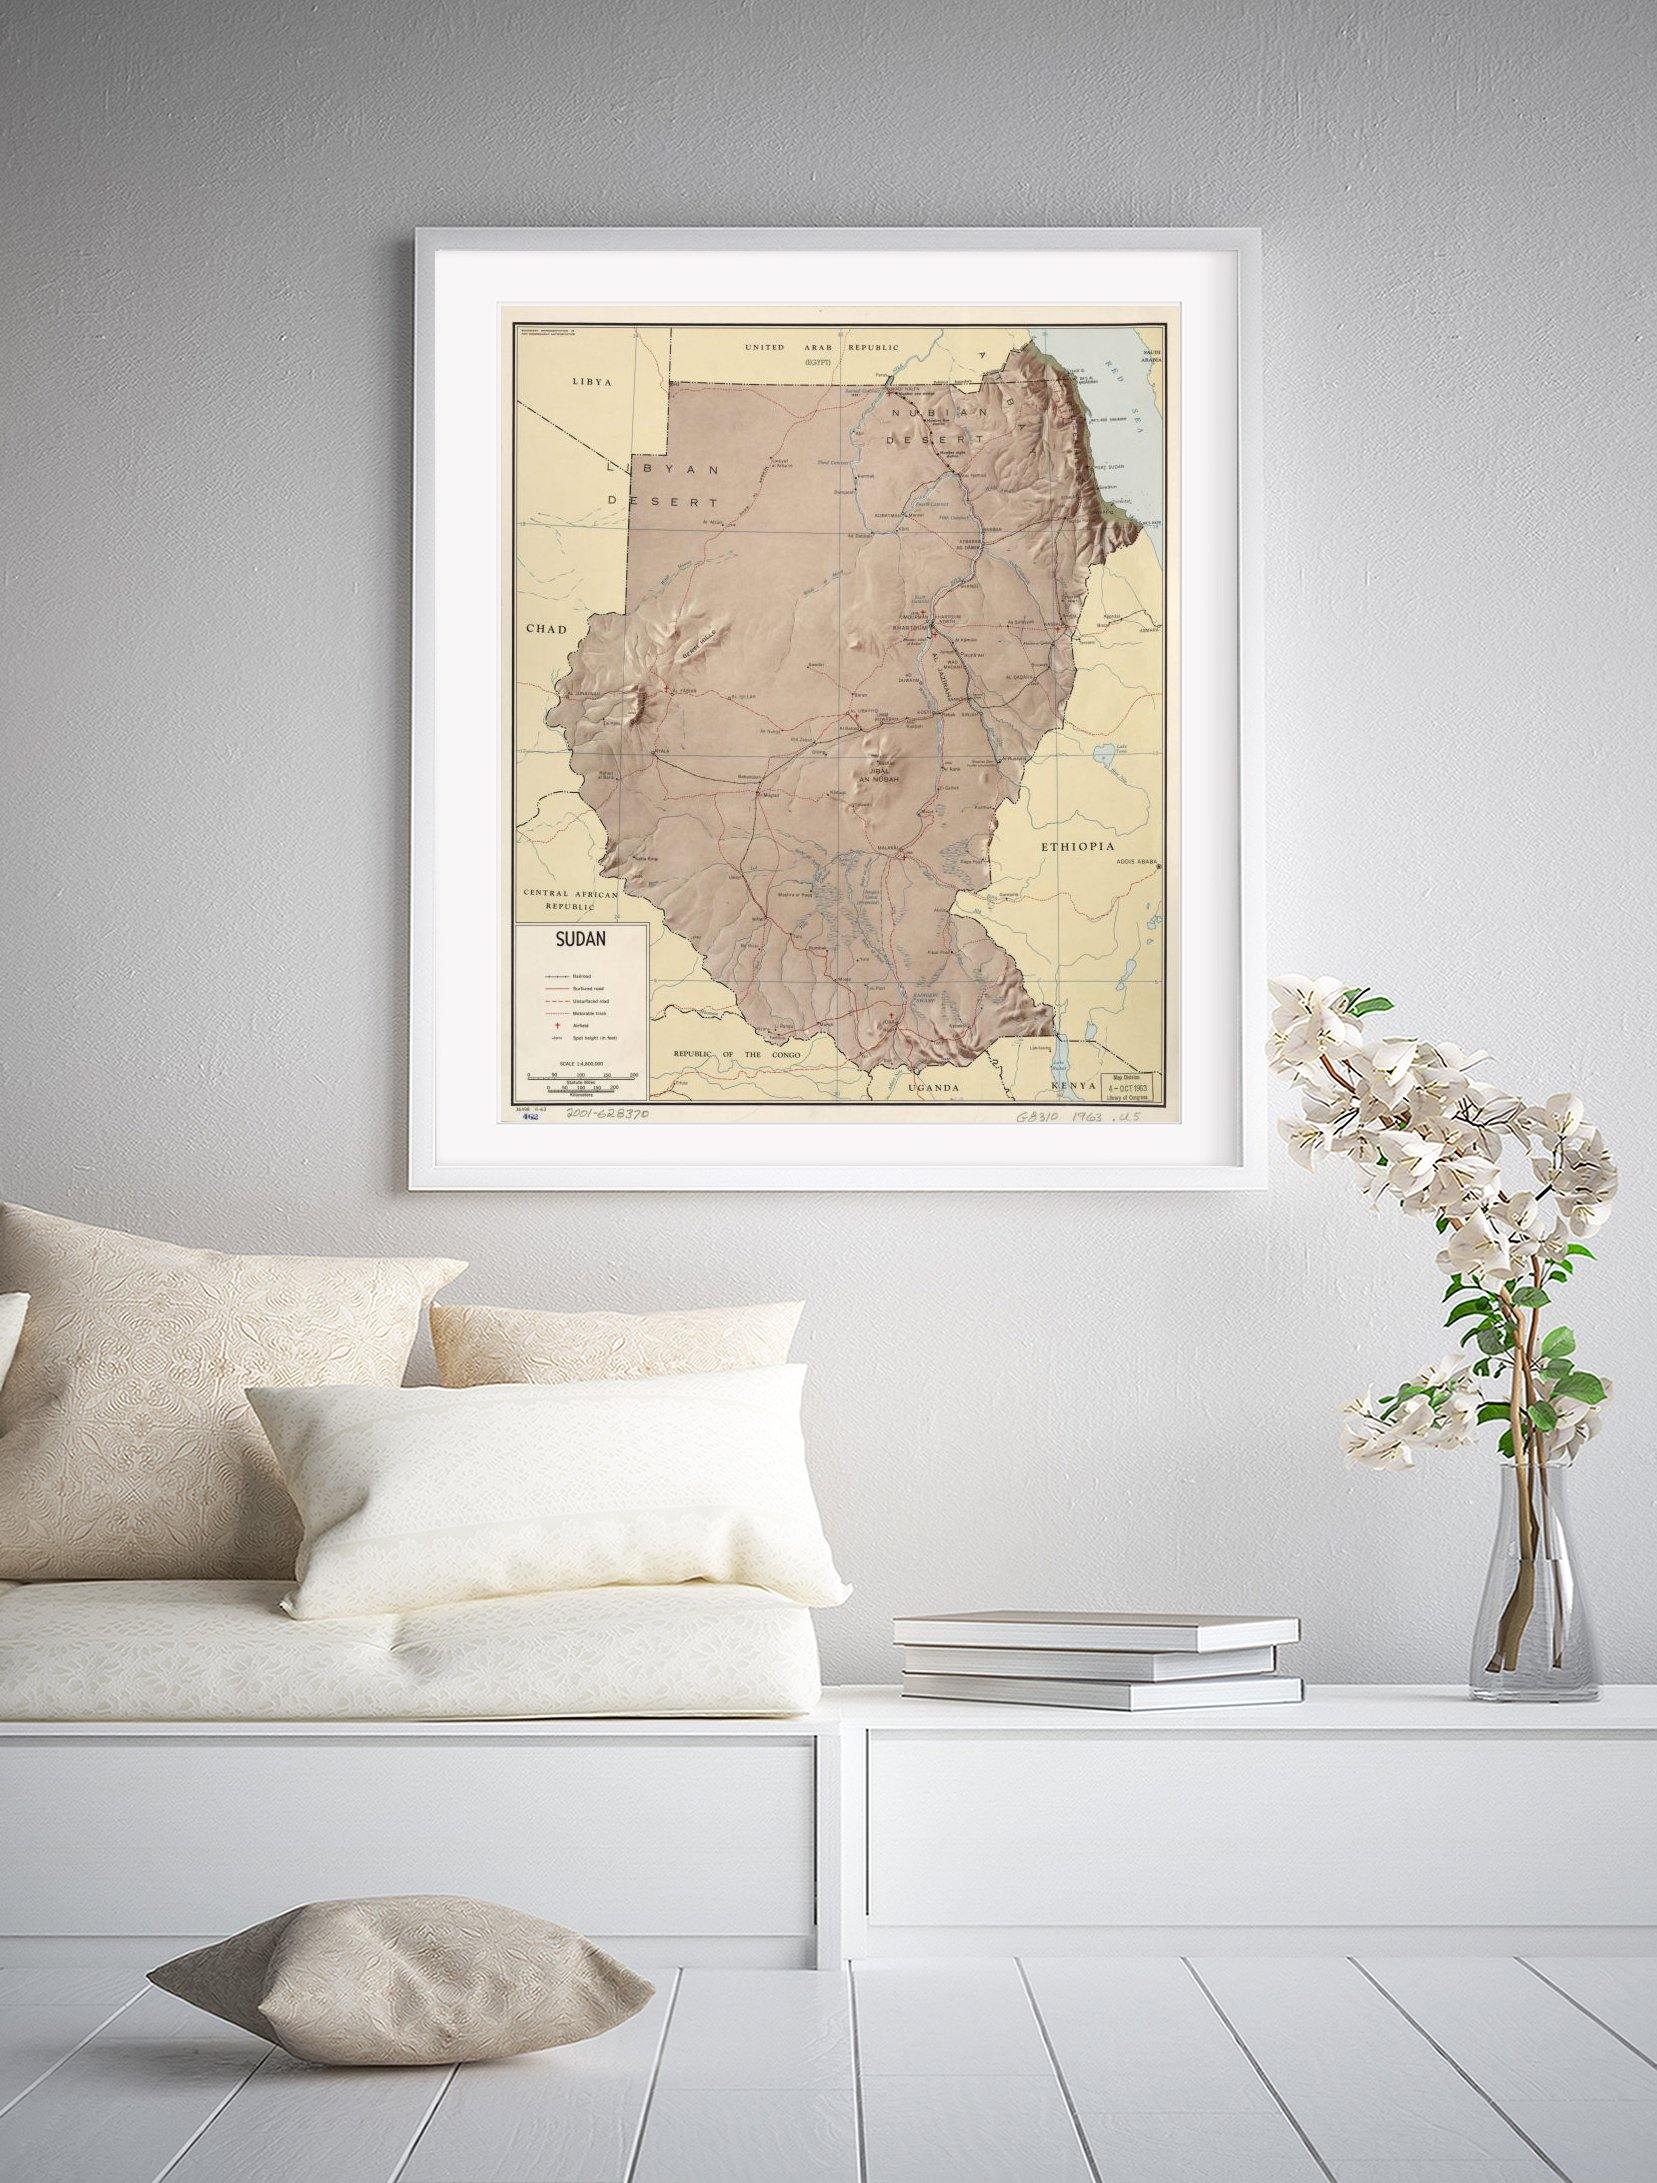 1963 Map| Sudan| Sudan Map Size: 20 inches x 24 inches |Fits 20x24 siz - New York Map Company